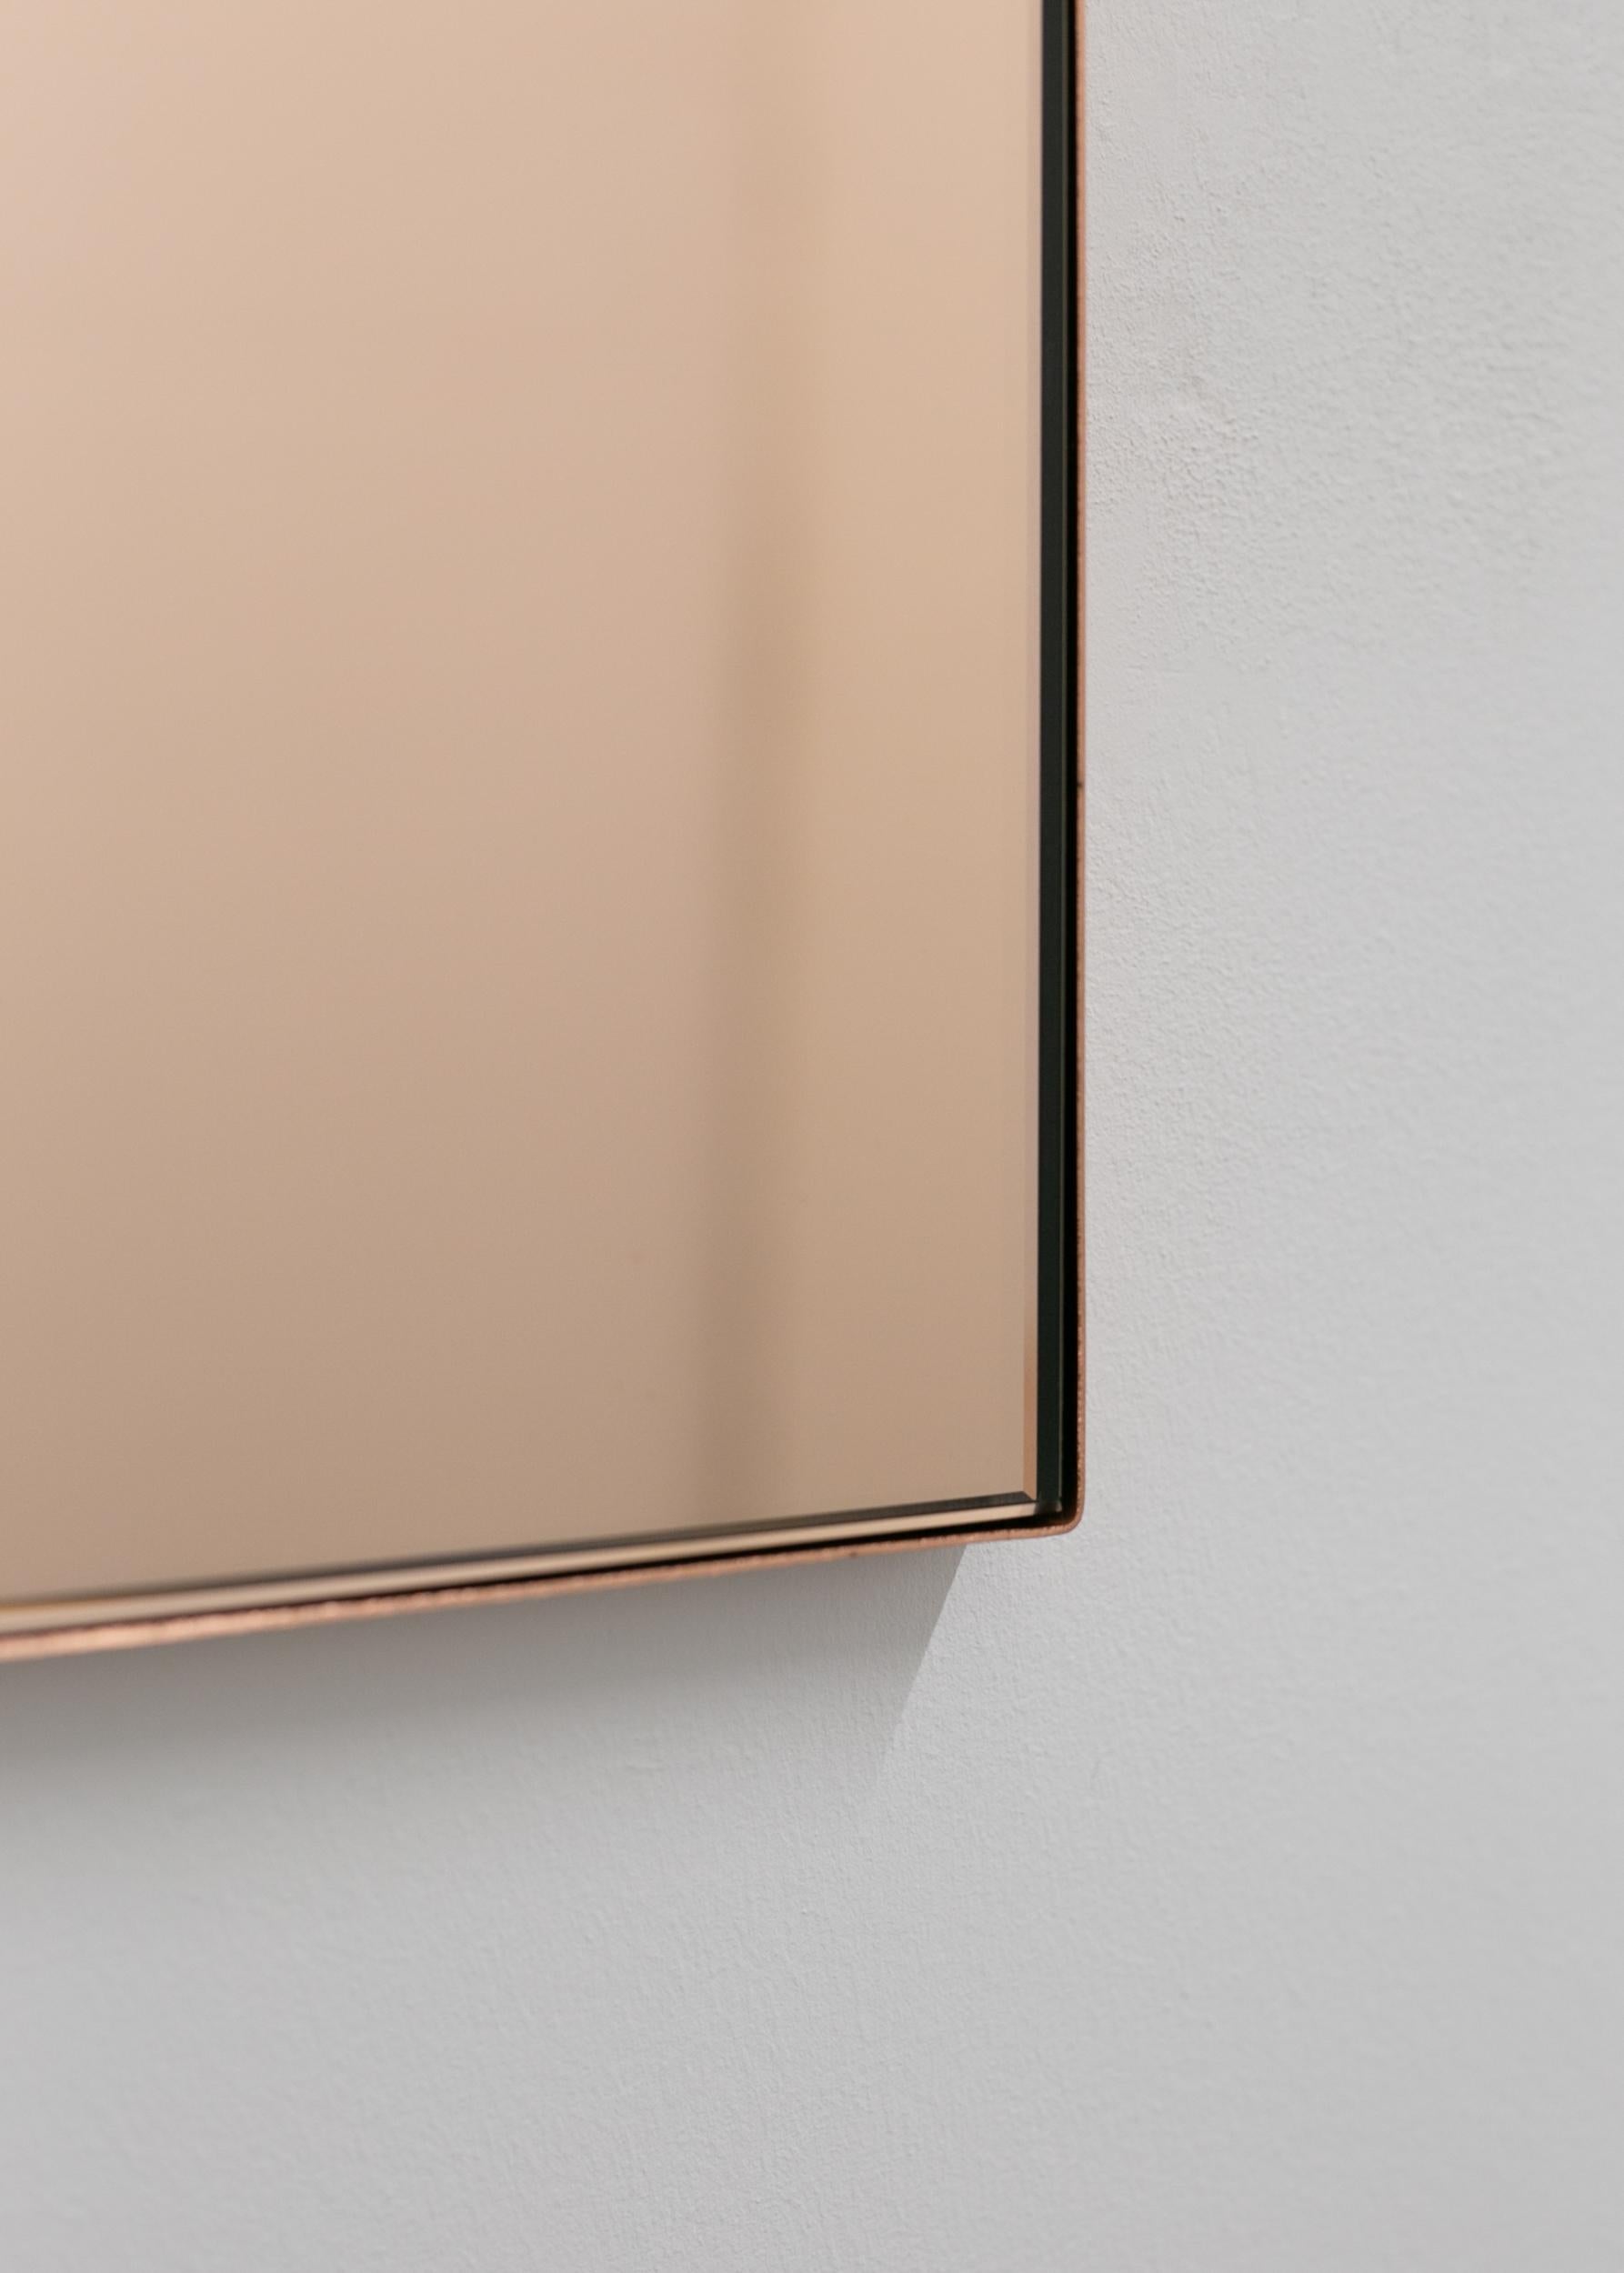 British Arcus Arch Shaped Rose Gold Customisable Mirror with a Copper Frame, Large For Sale